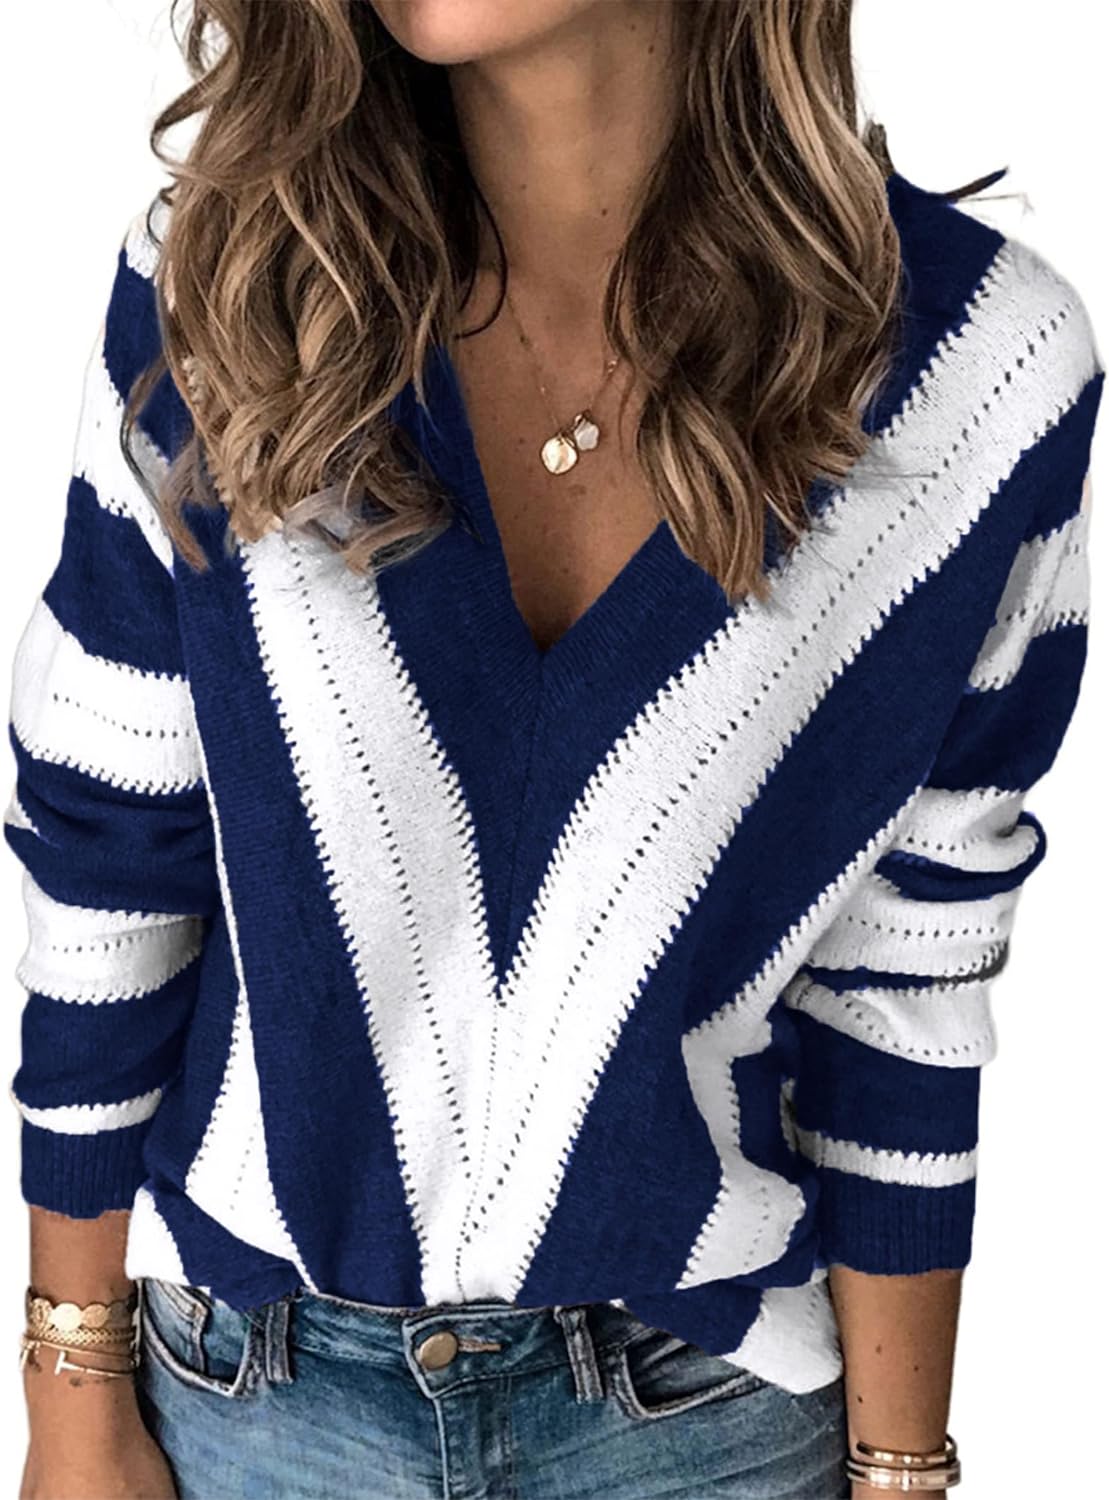 PRETTYGARDEN Women' Fashion Long Sleeve Striped Color Block Knitted Sweater Crew Neck Loose Pullover Jumper Tops